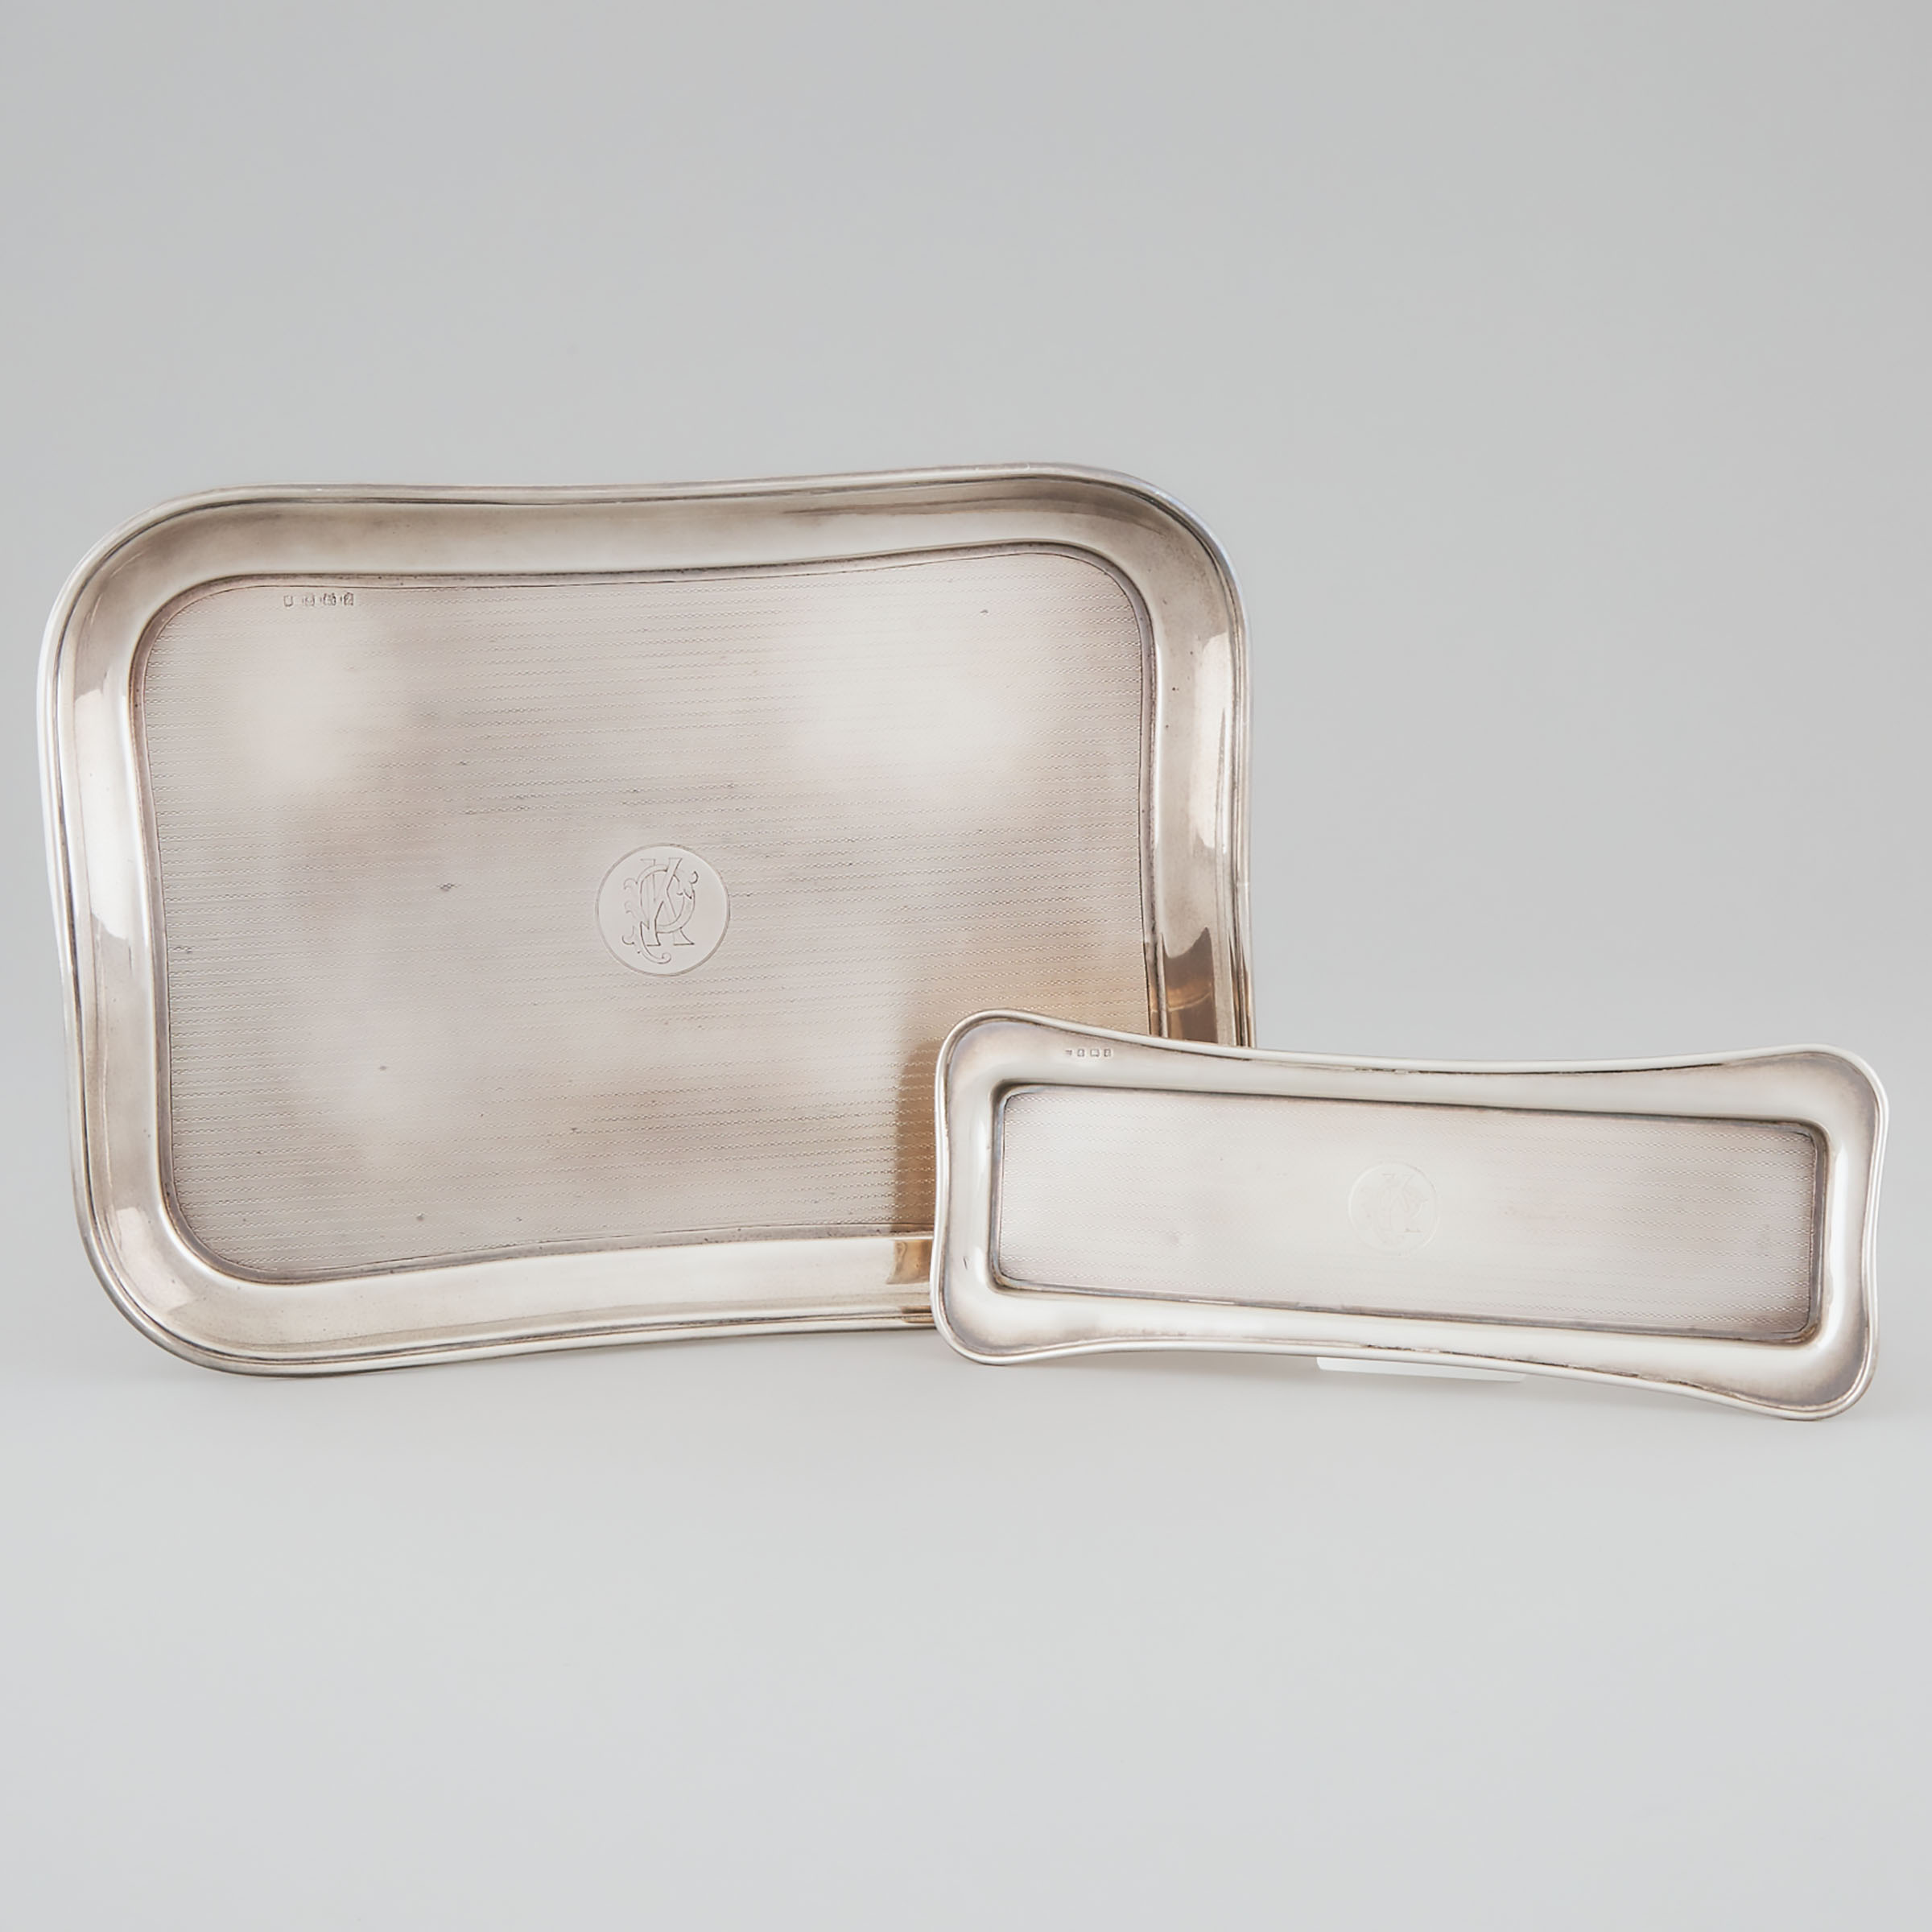 Late Victorian Silver Rectangular Dressing Table Tray and a Pin Tray, Charles S. Green & Co., Birmingham, 1899